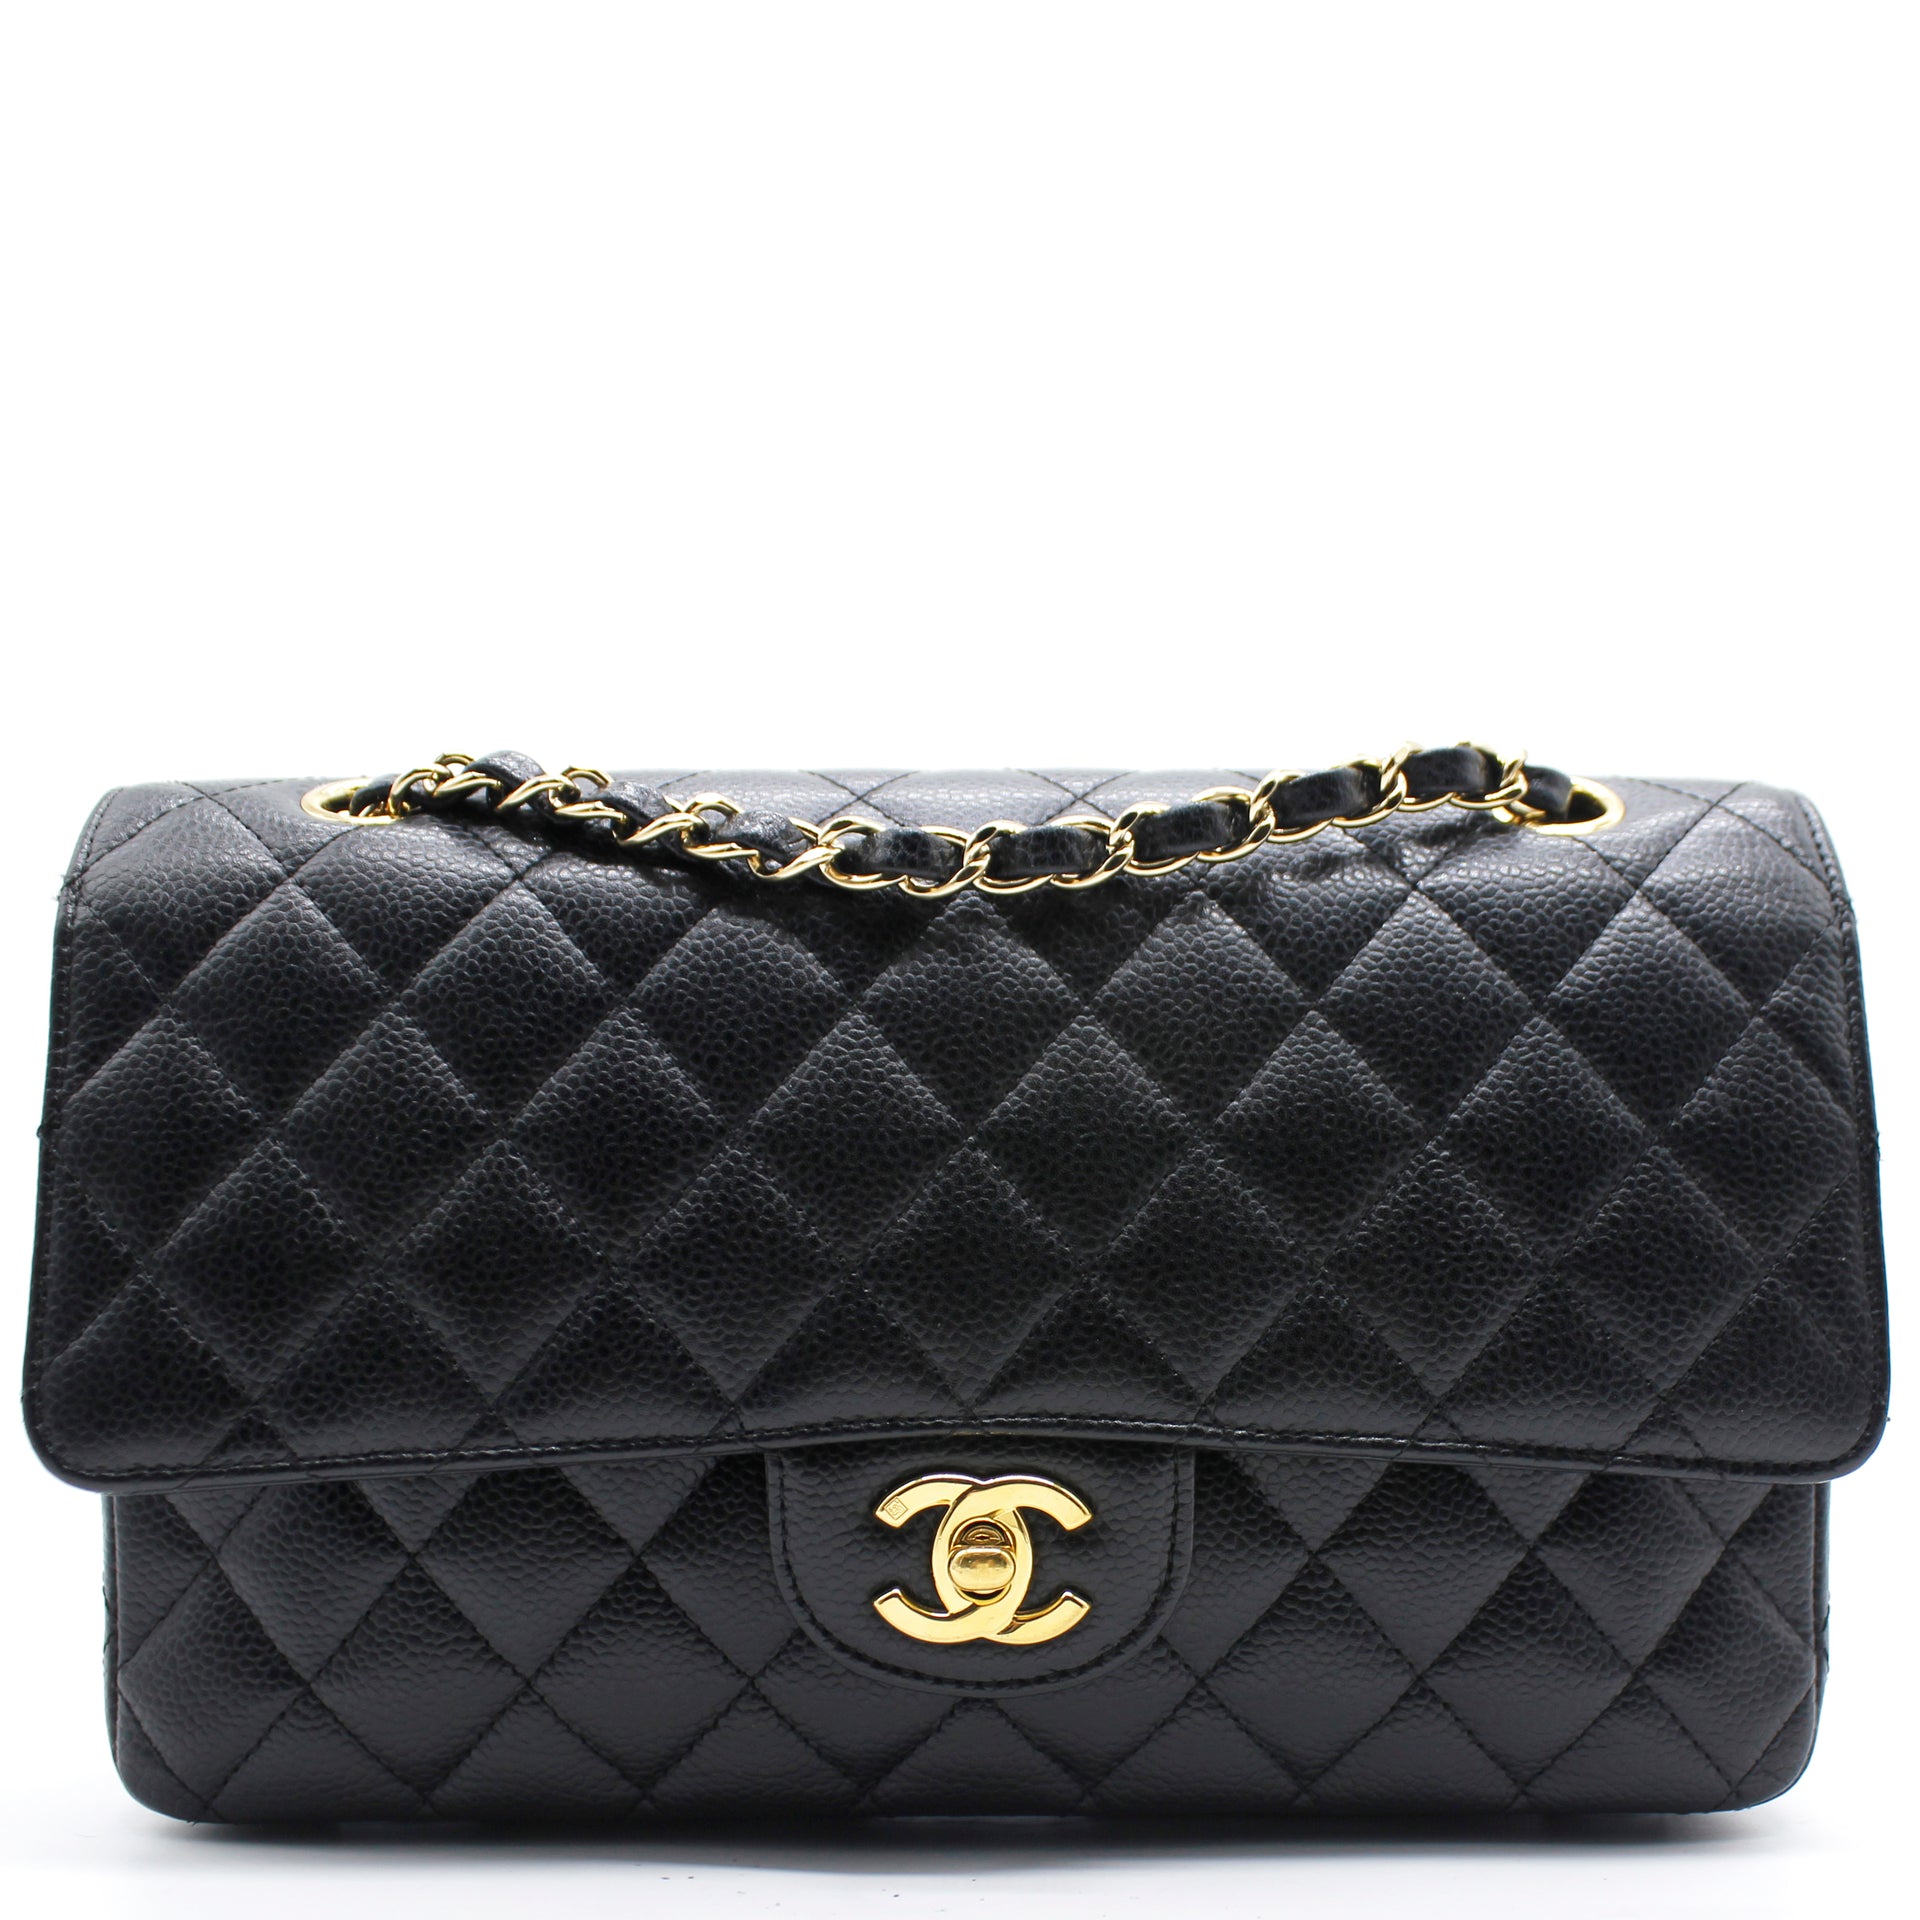 Vintage CHANEL Classic Black Quilted Lambskin Small Single Flap Bag  eBay